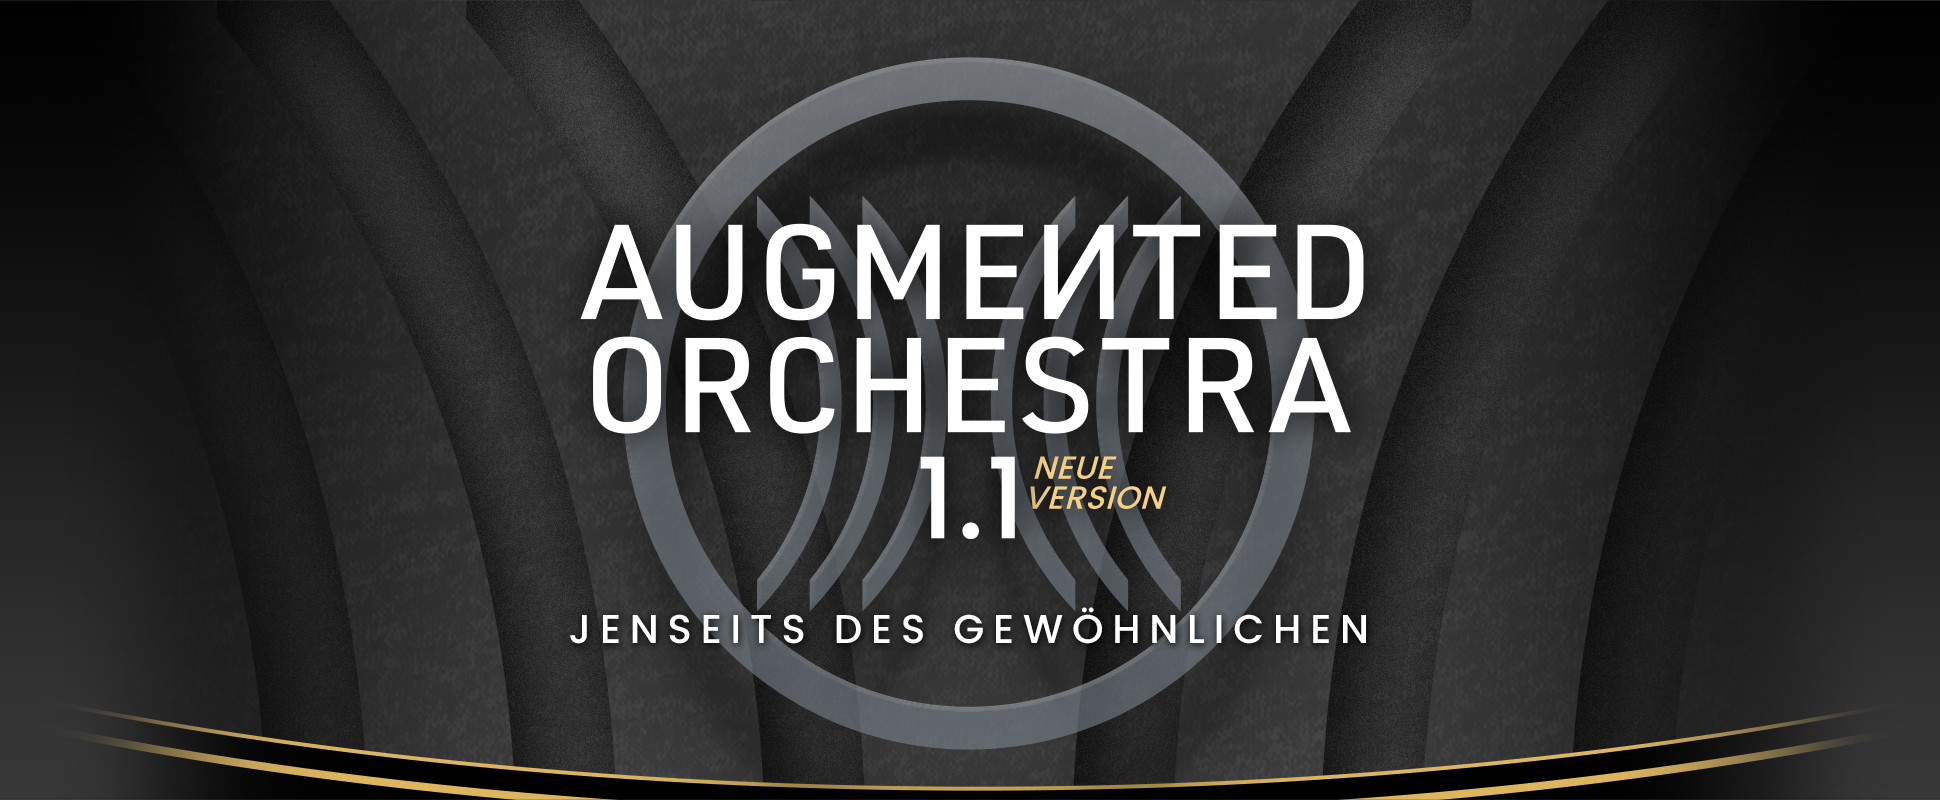 Augmented Orchestra 1.1 - Special offer